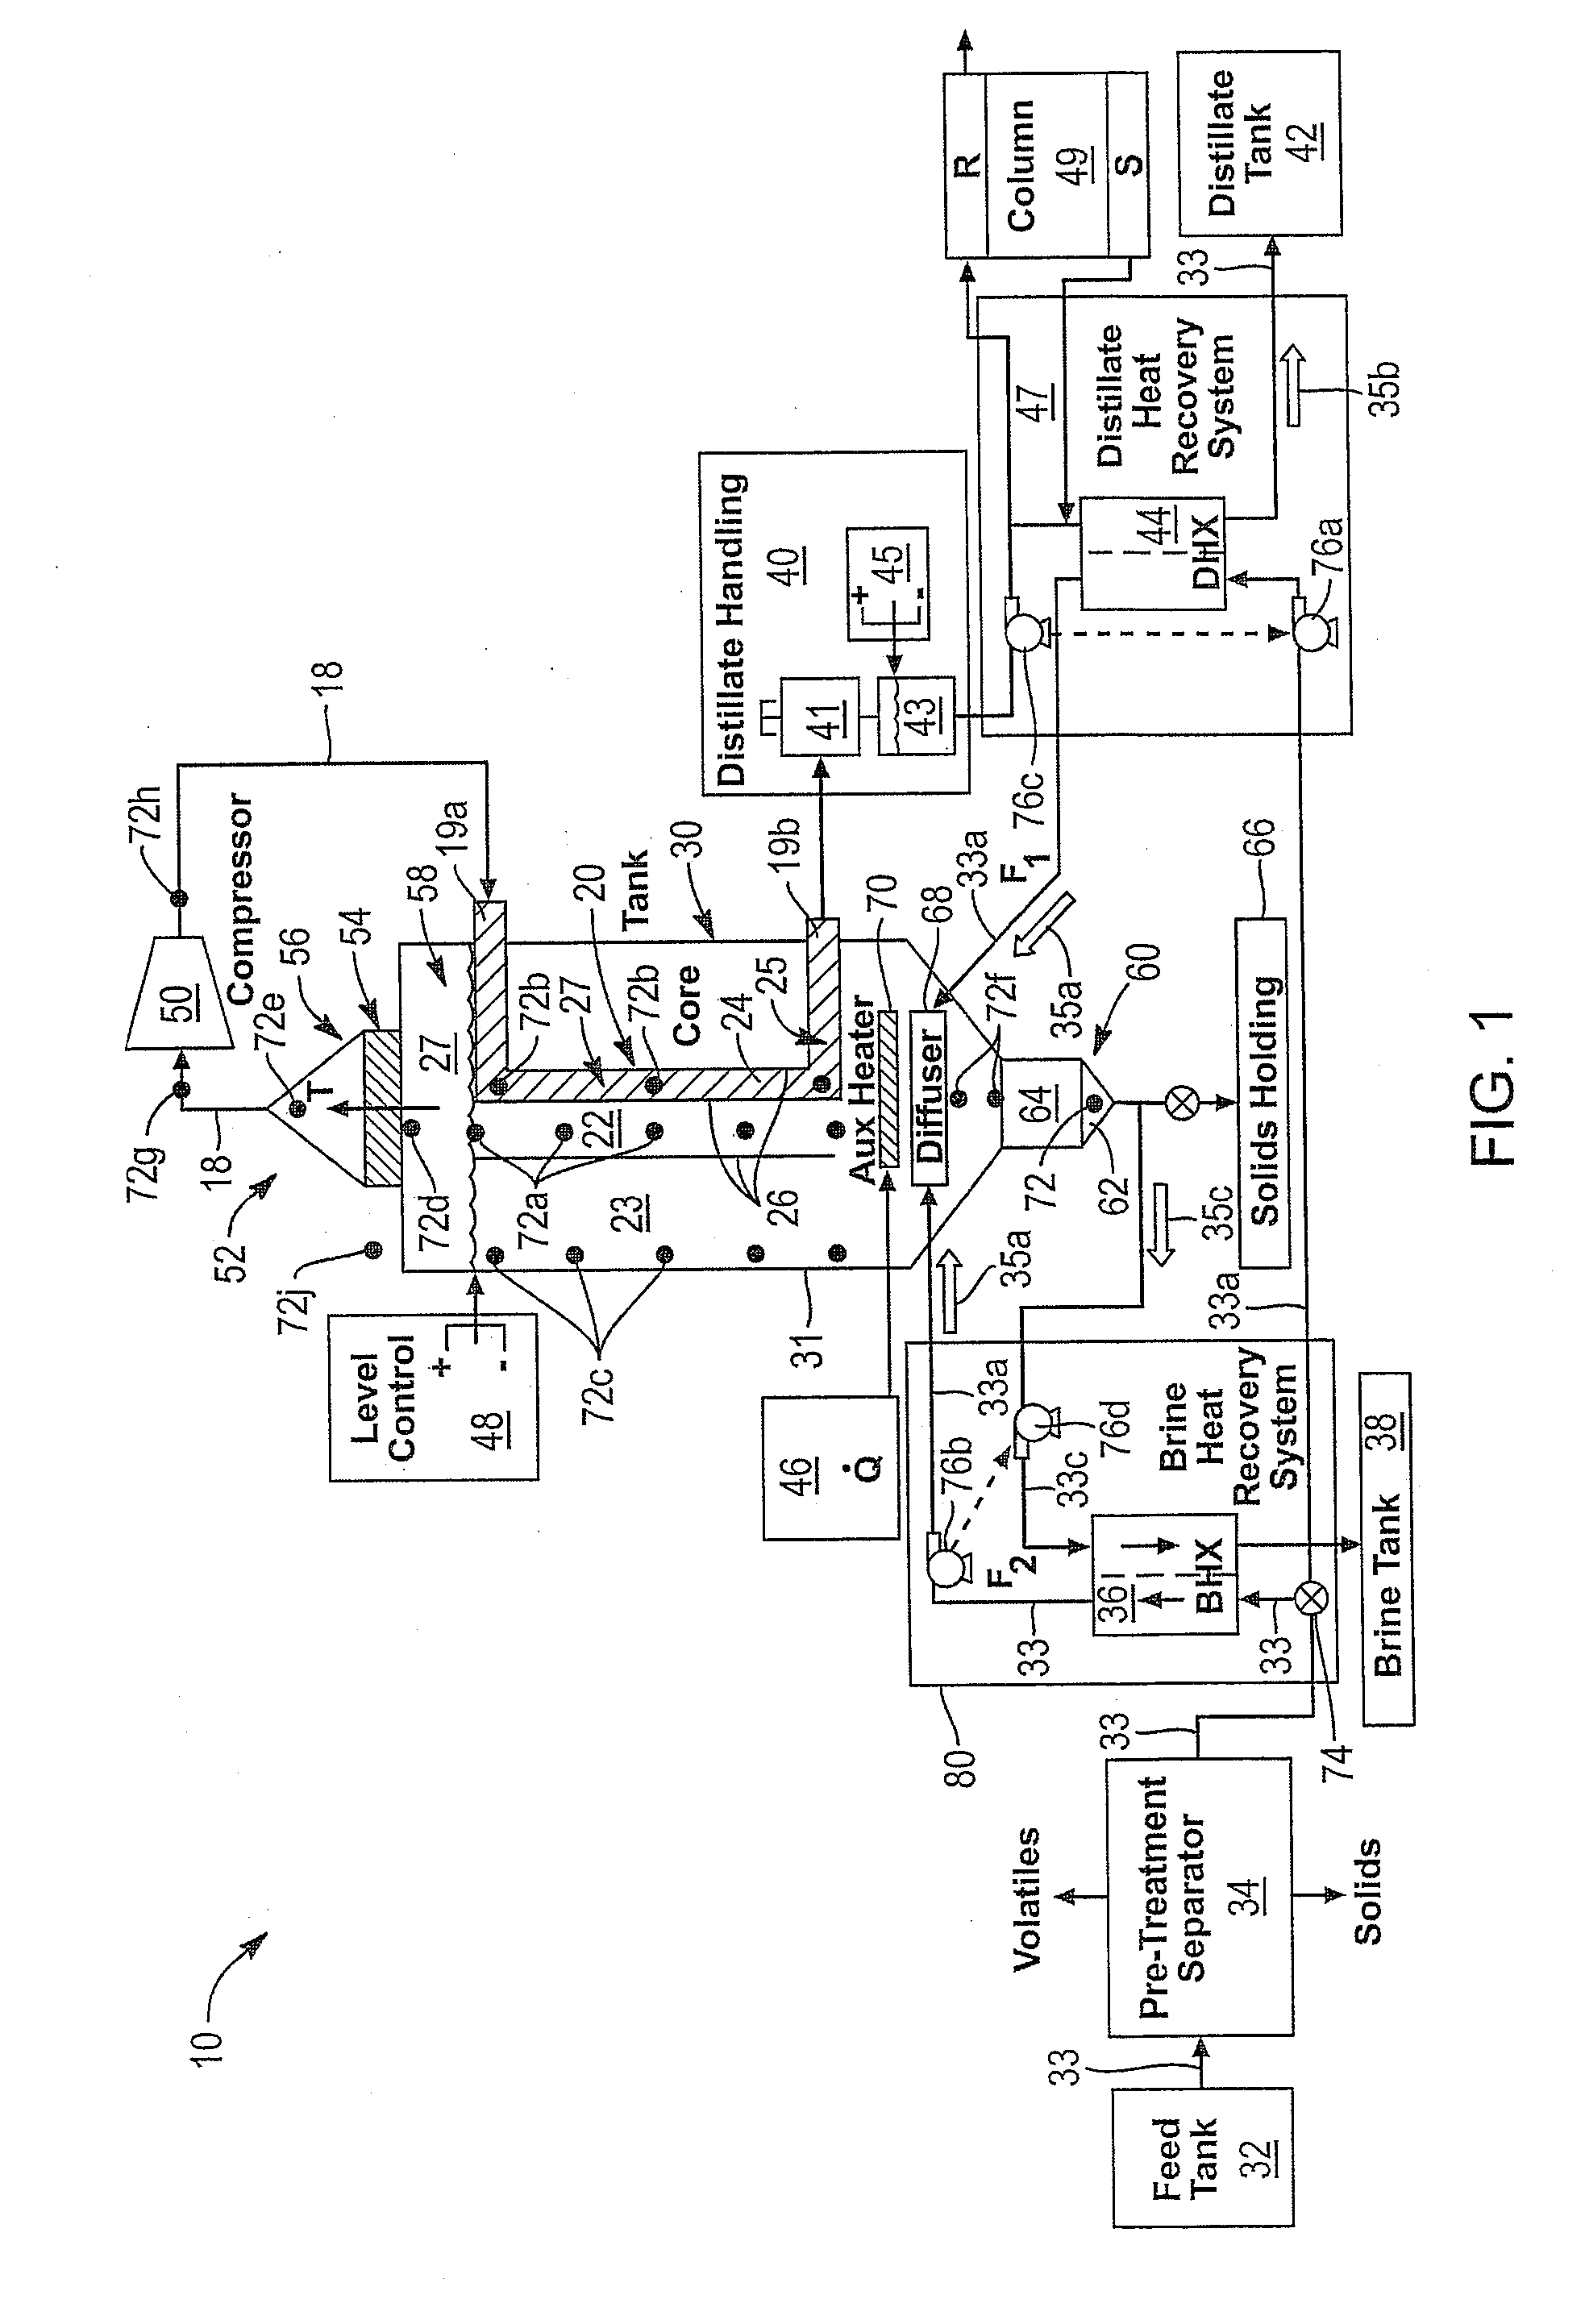 Controlled-gradient, accelerated-vapor-recompression apparatus and method